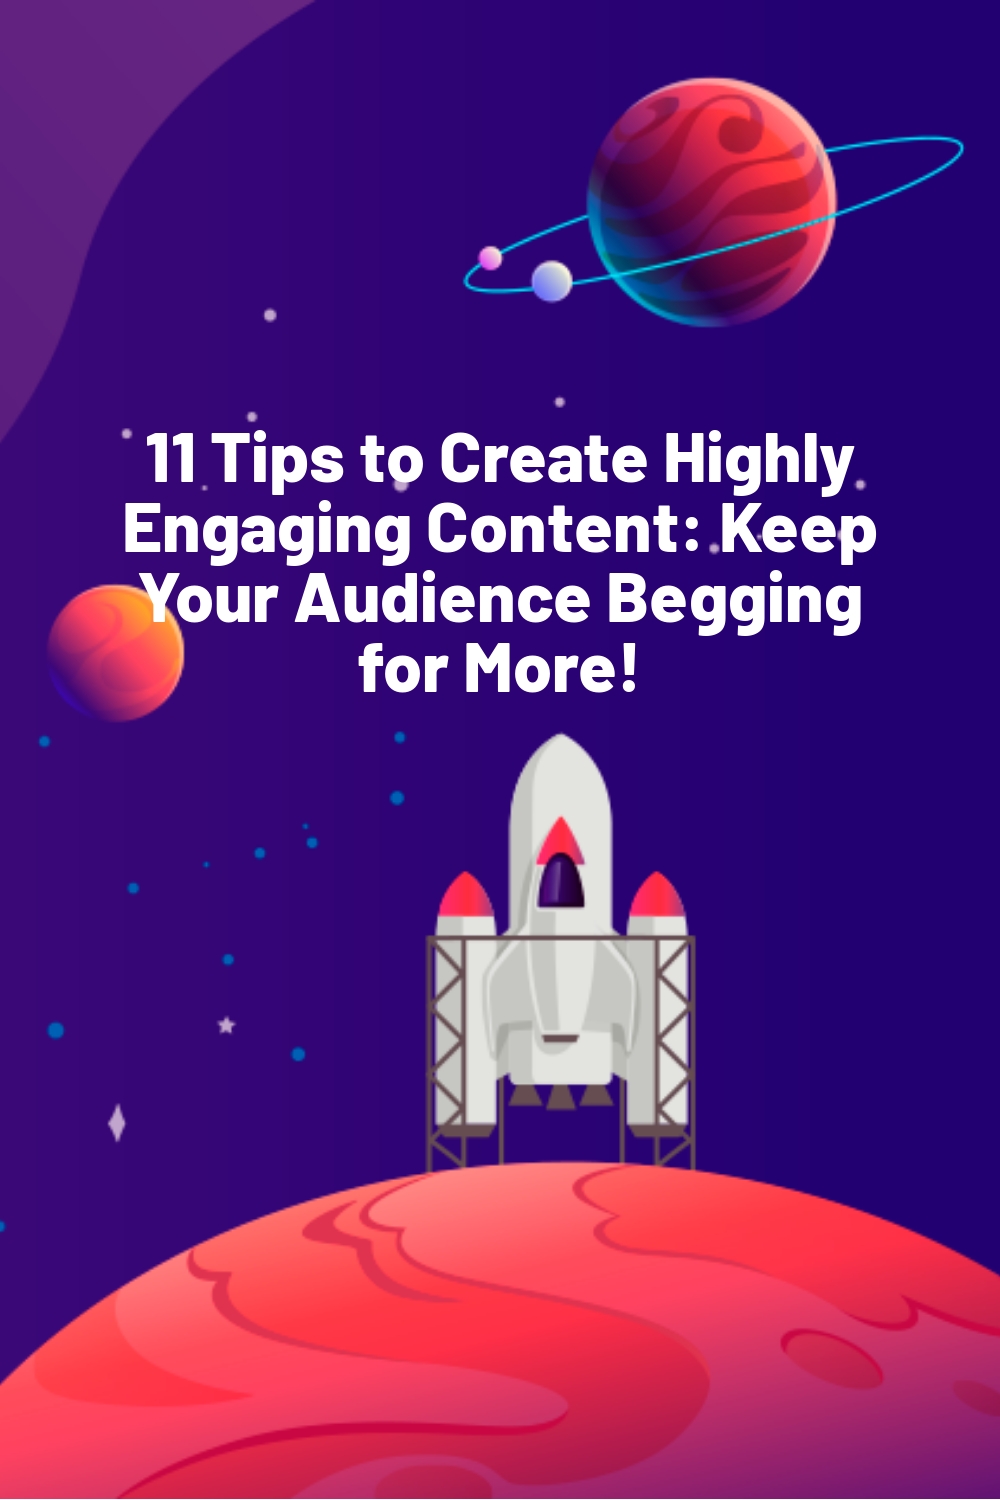 11 Tips to Create Highly Engaging Content: Keep Your Audience Begging for More!